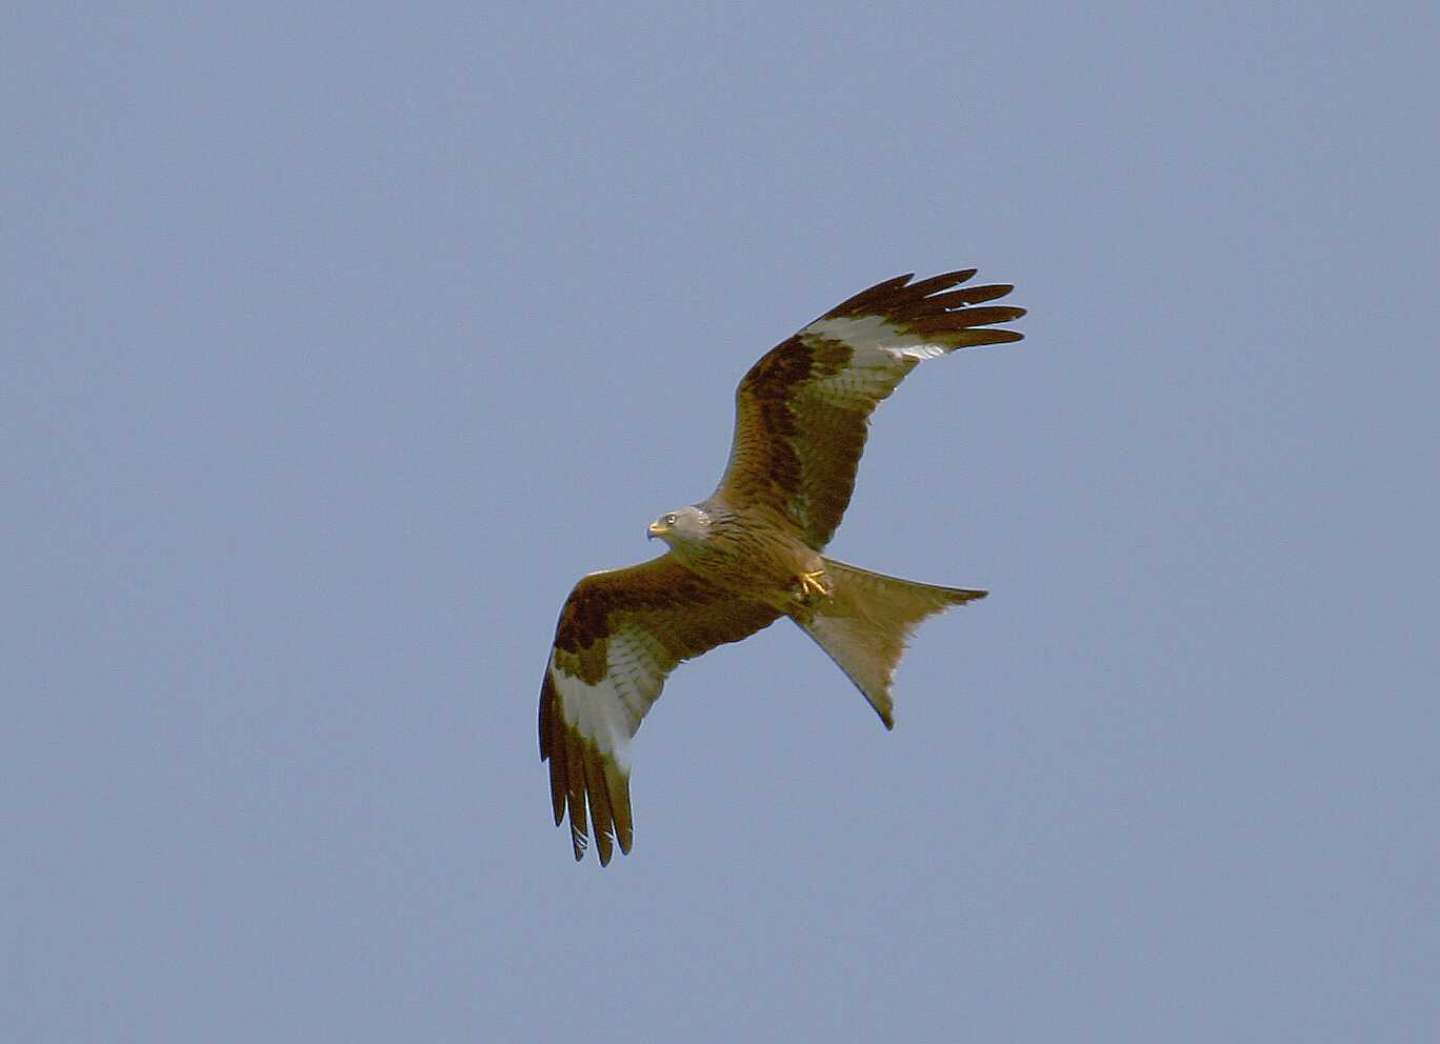 The Red kite from the east to spend the winter in the west